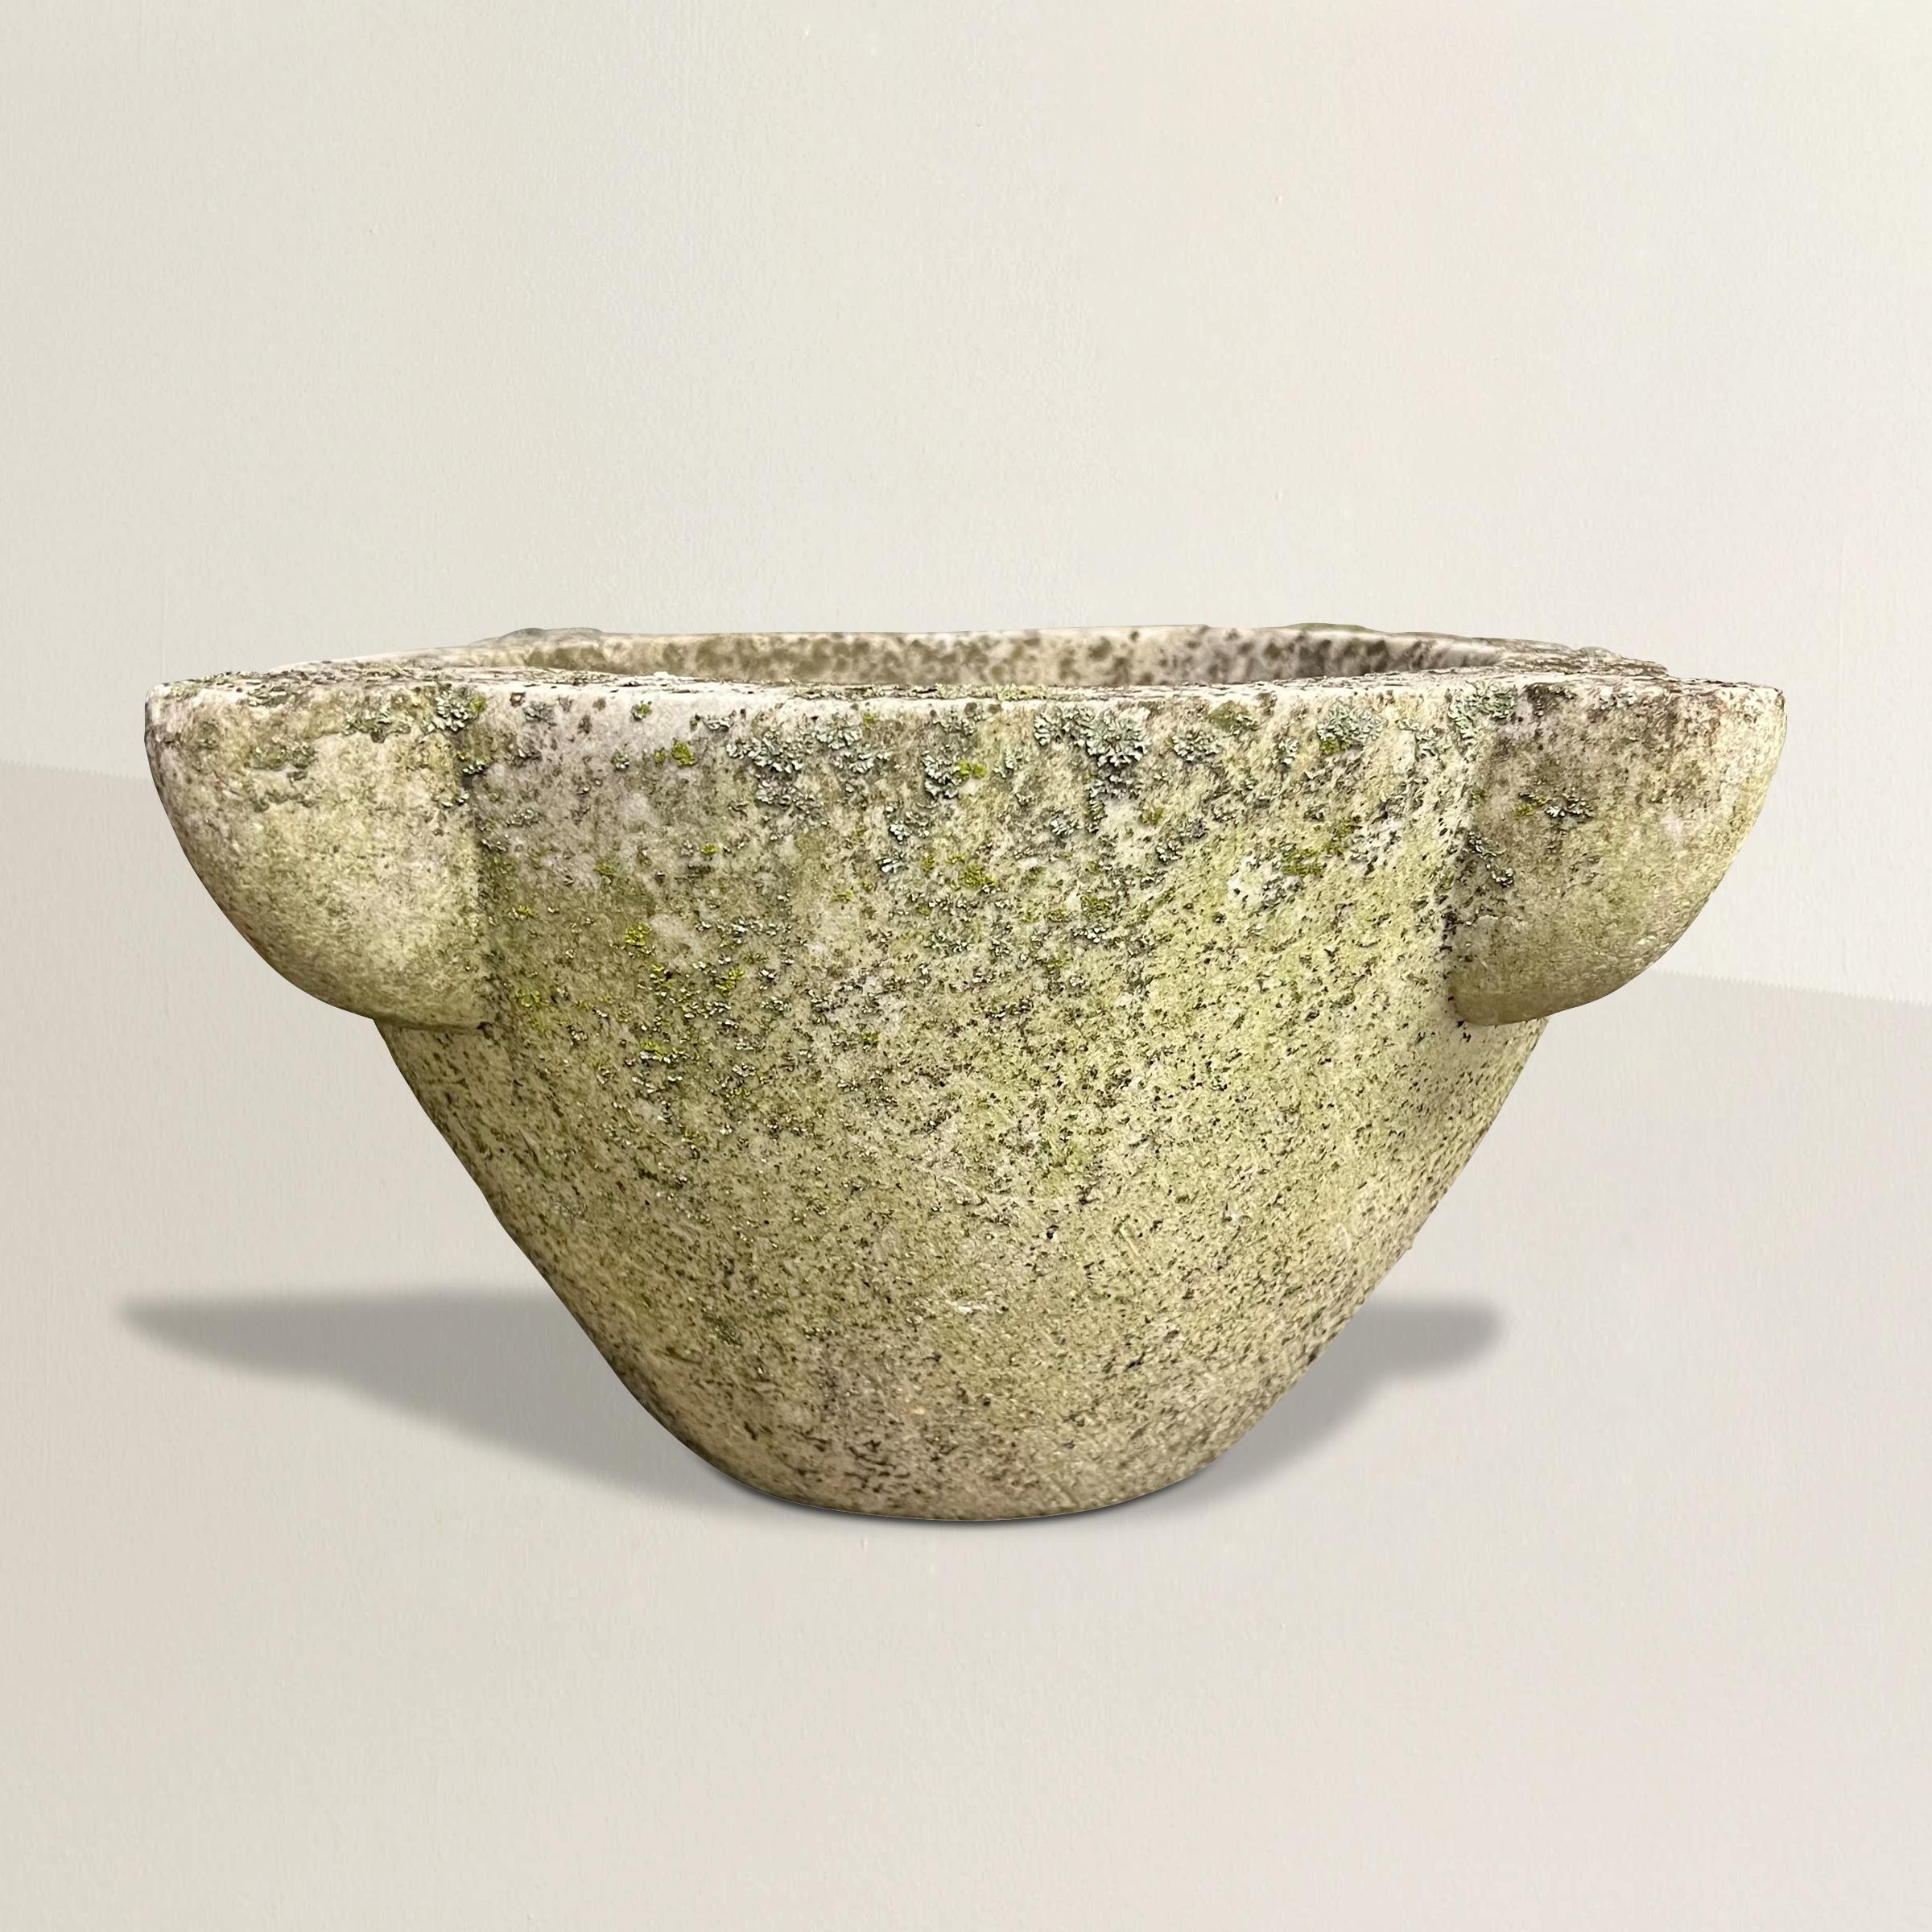 Step into a mesmerizing culinary journey with this 19th-century French marble mortar, gracefully adorned with the passage of time. Lovingly weathered by decades of exposure to the elements, its surface now boasts an enchanting patina of green mosses